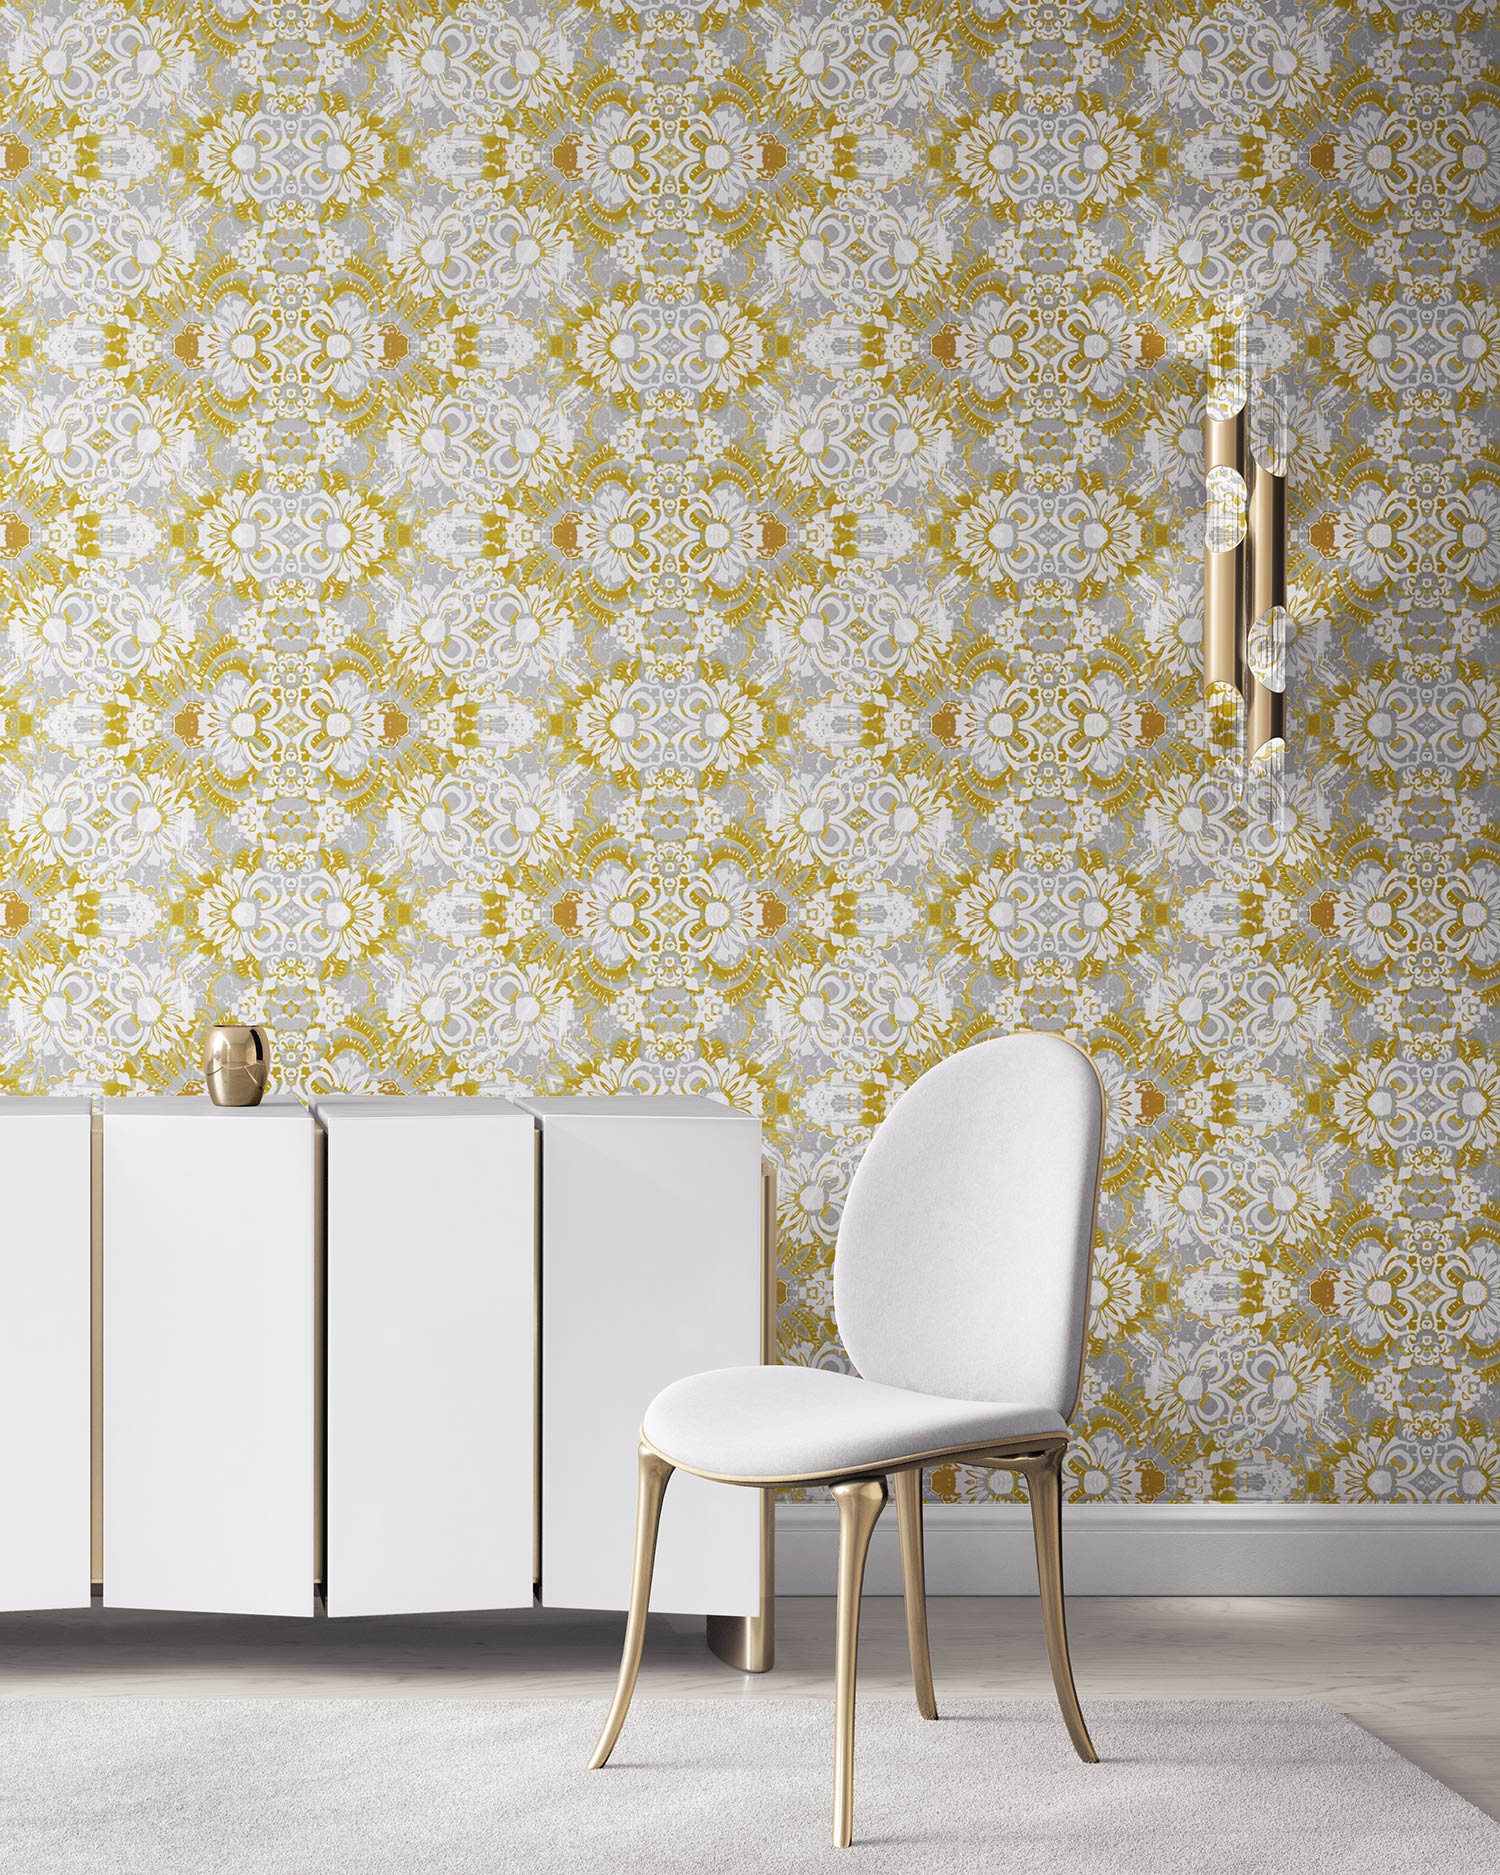 Pearl & Maude's abstract botanical Carmen nonwoven vellum wallpaper in daisy yellow, white and grey installed in a beautiful living room with white and brass furniture.